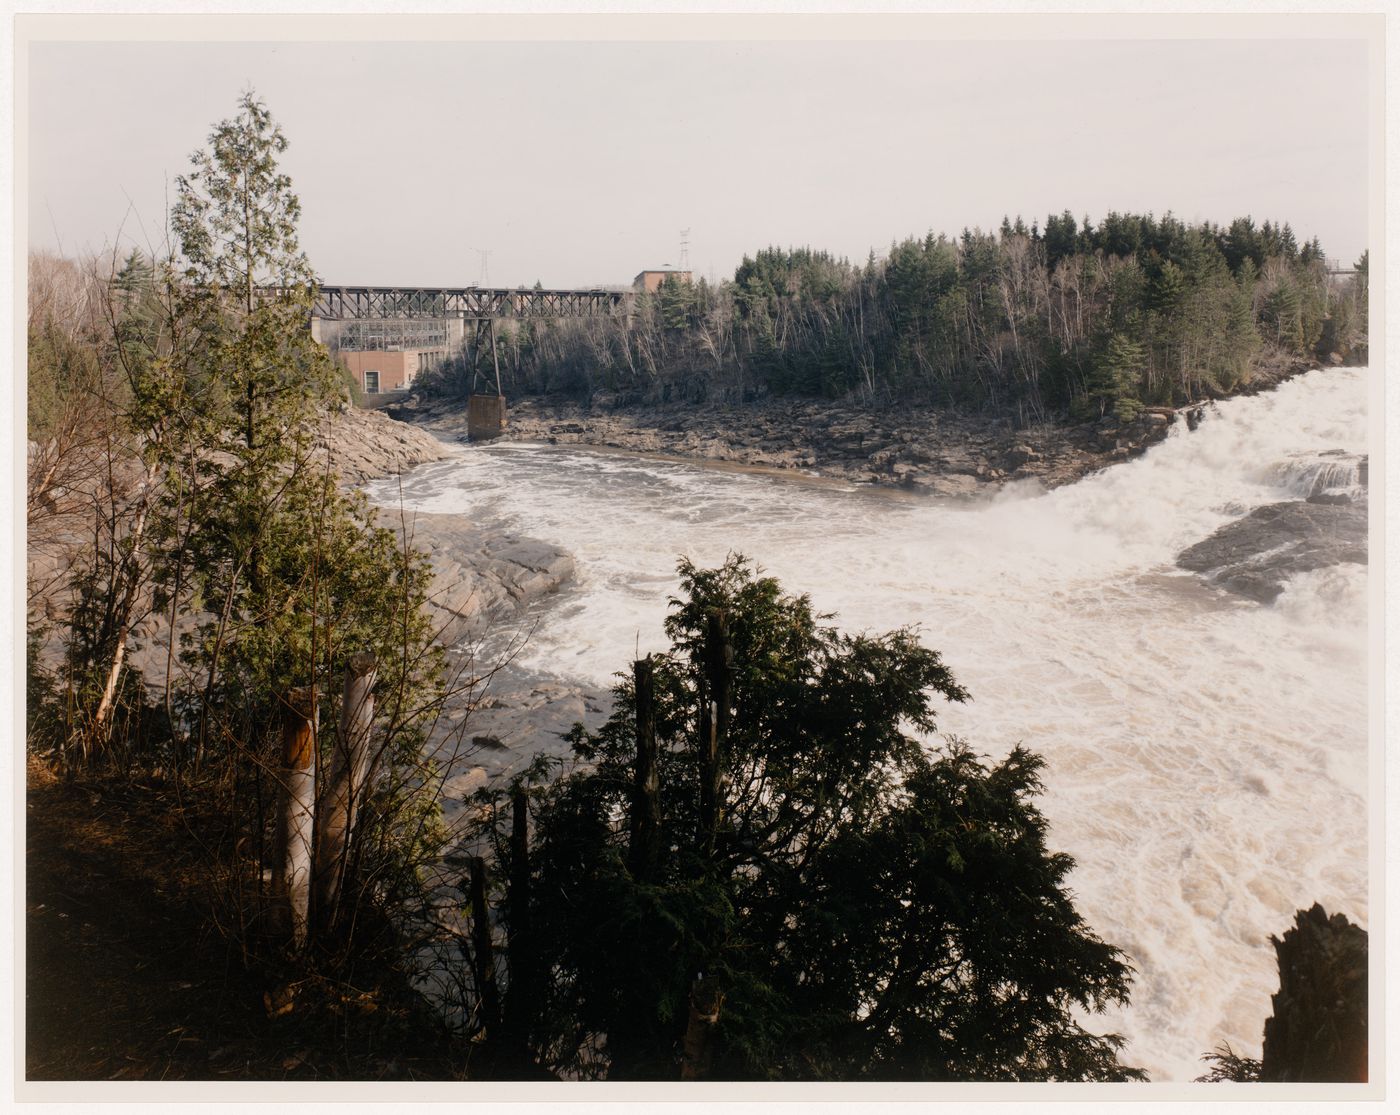 Section 1 of 2 of Panorama of Shawinigan Falls, looking north, showing gorge, Shawinigan 3 power station, Canadian Pacific bridge, spillway, and Melville Island